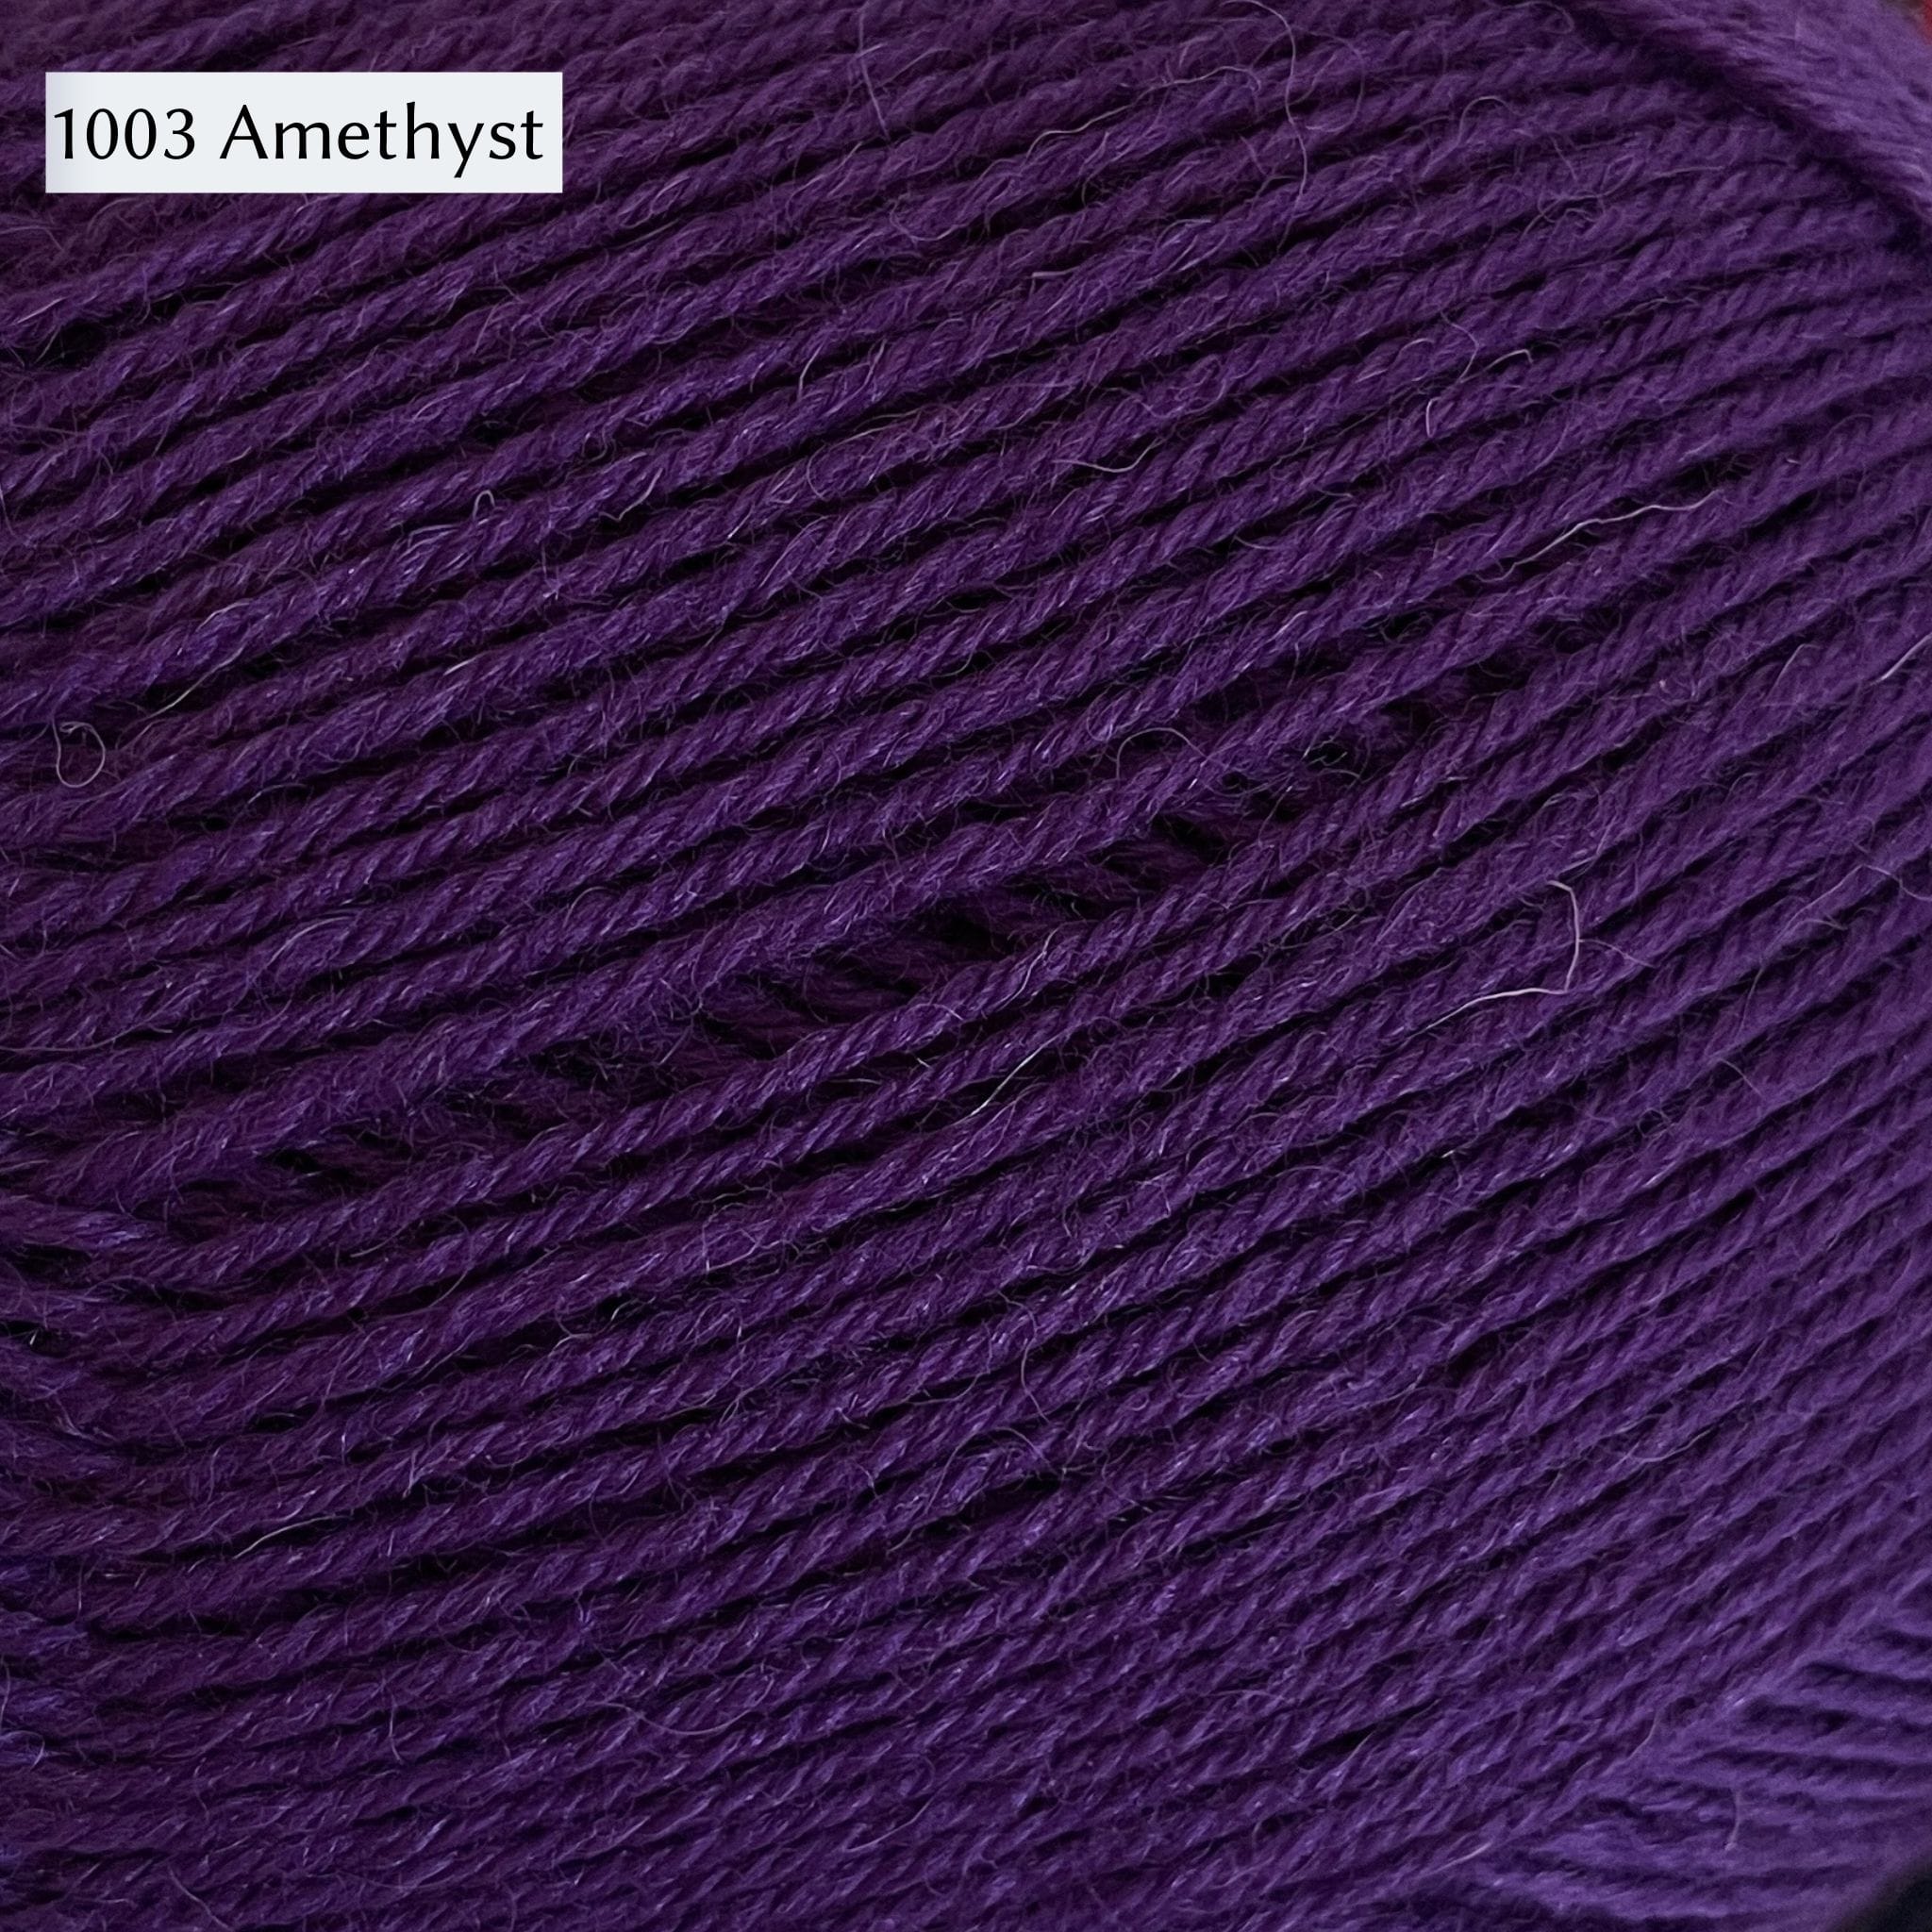 West Yorkshire Spinners Signature 4ply yarn, 100-gram ball, fingering weight, in color 1003 Amethyst, a deep royal purple